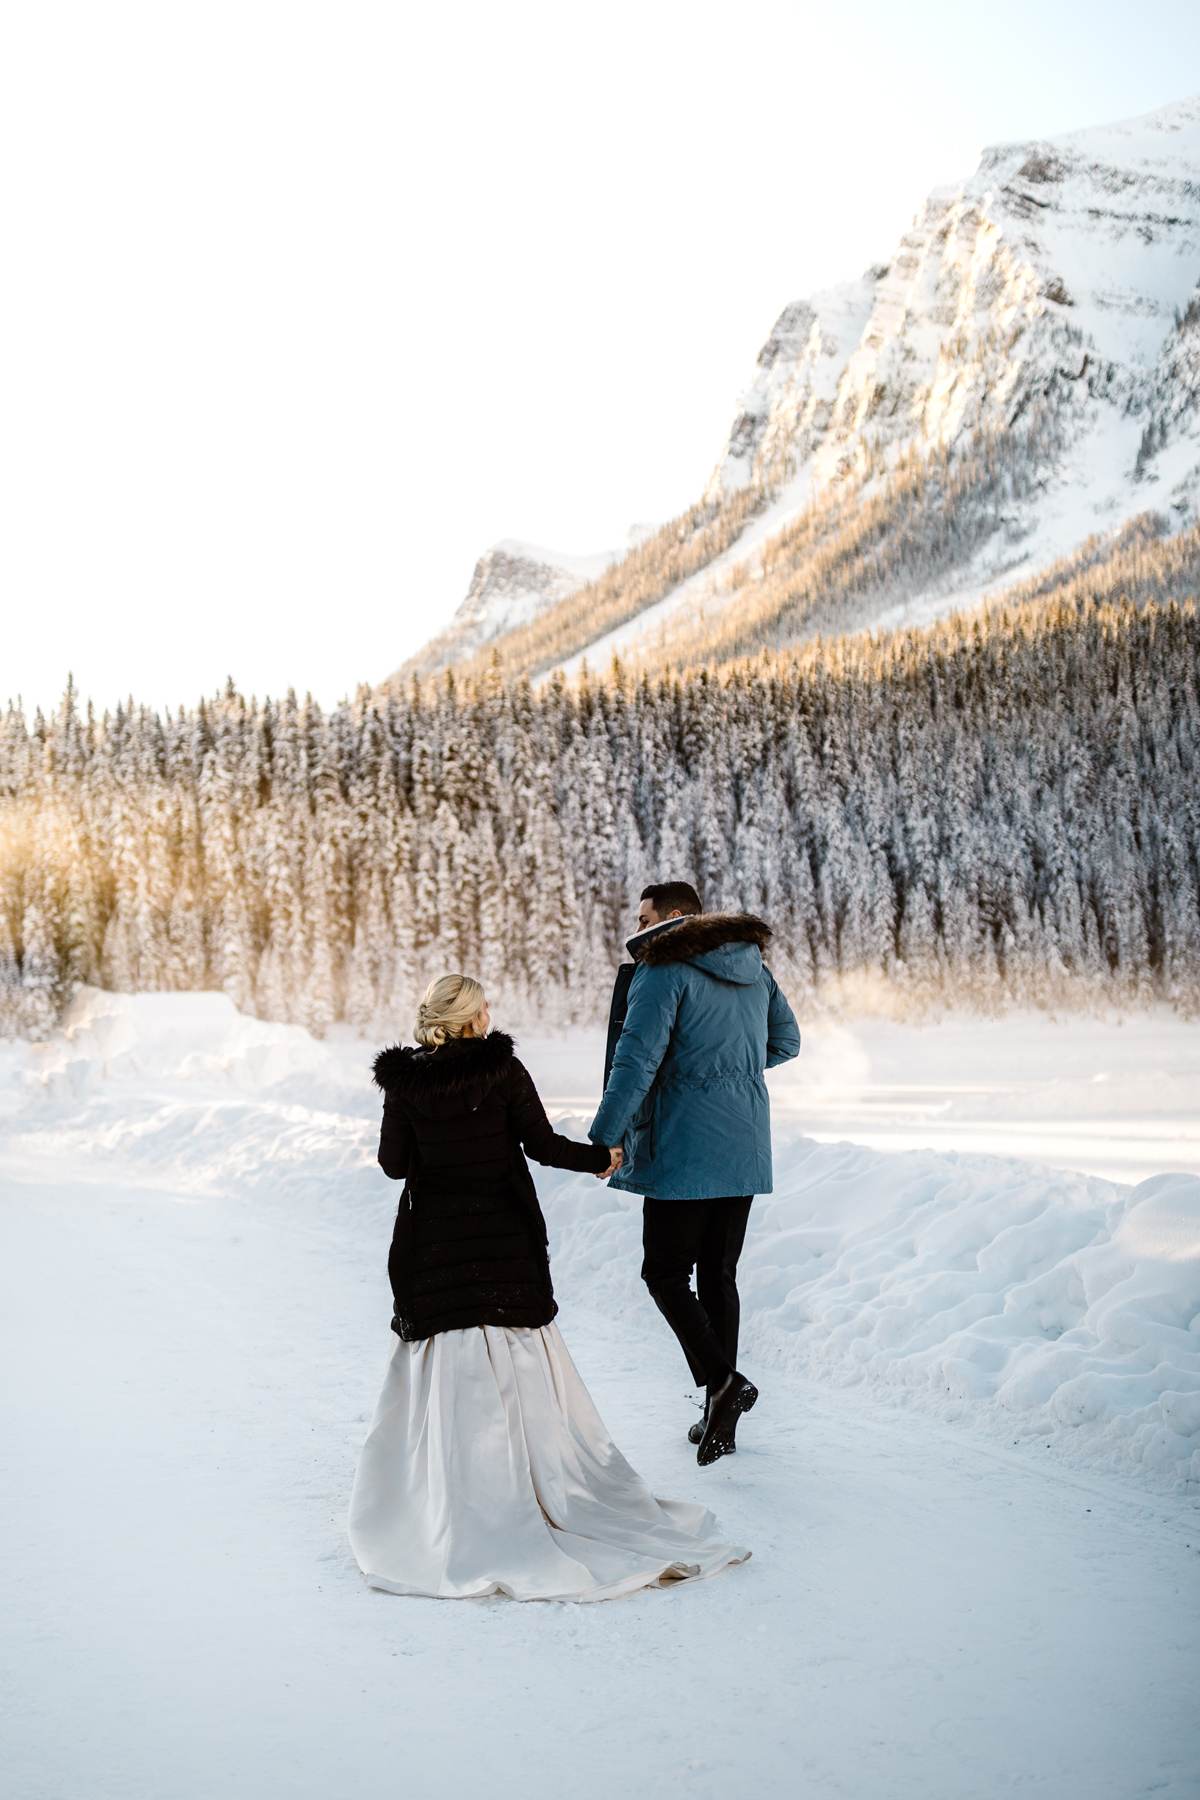 Fairmont Chateau Lake Louise Wedding Photography in Winter - Image 6